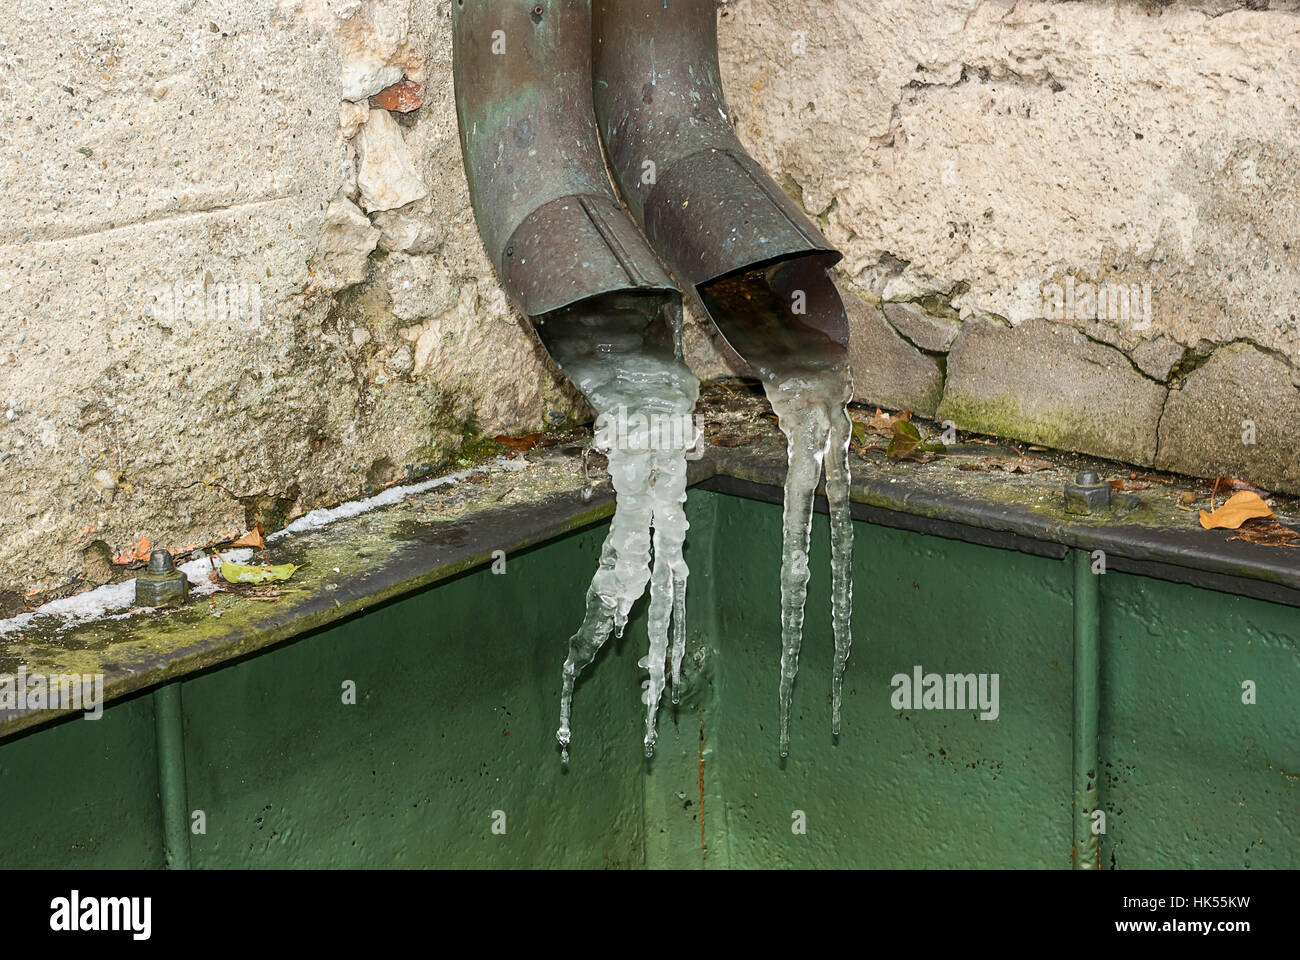 Frozen water shapes icicles at the end of rain pipes. Stock Photo